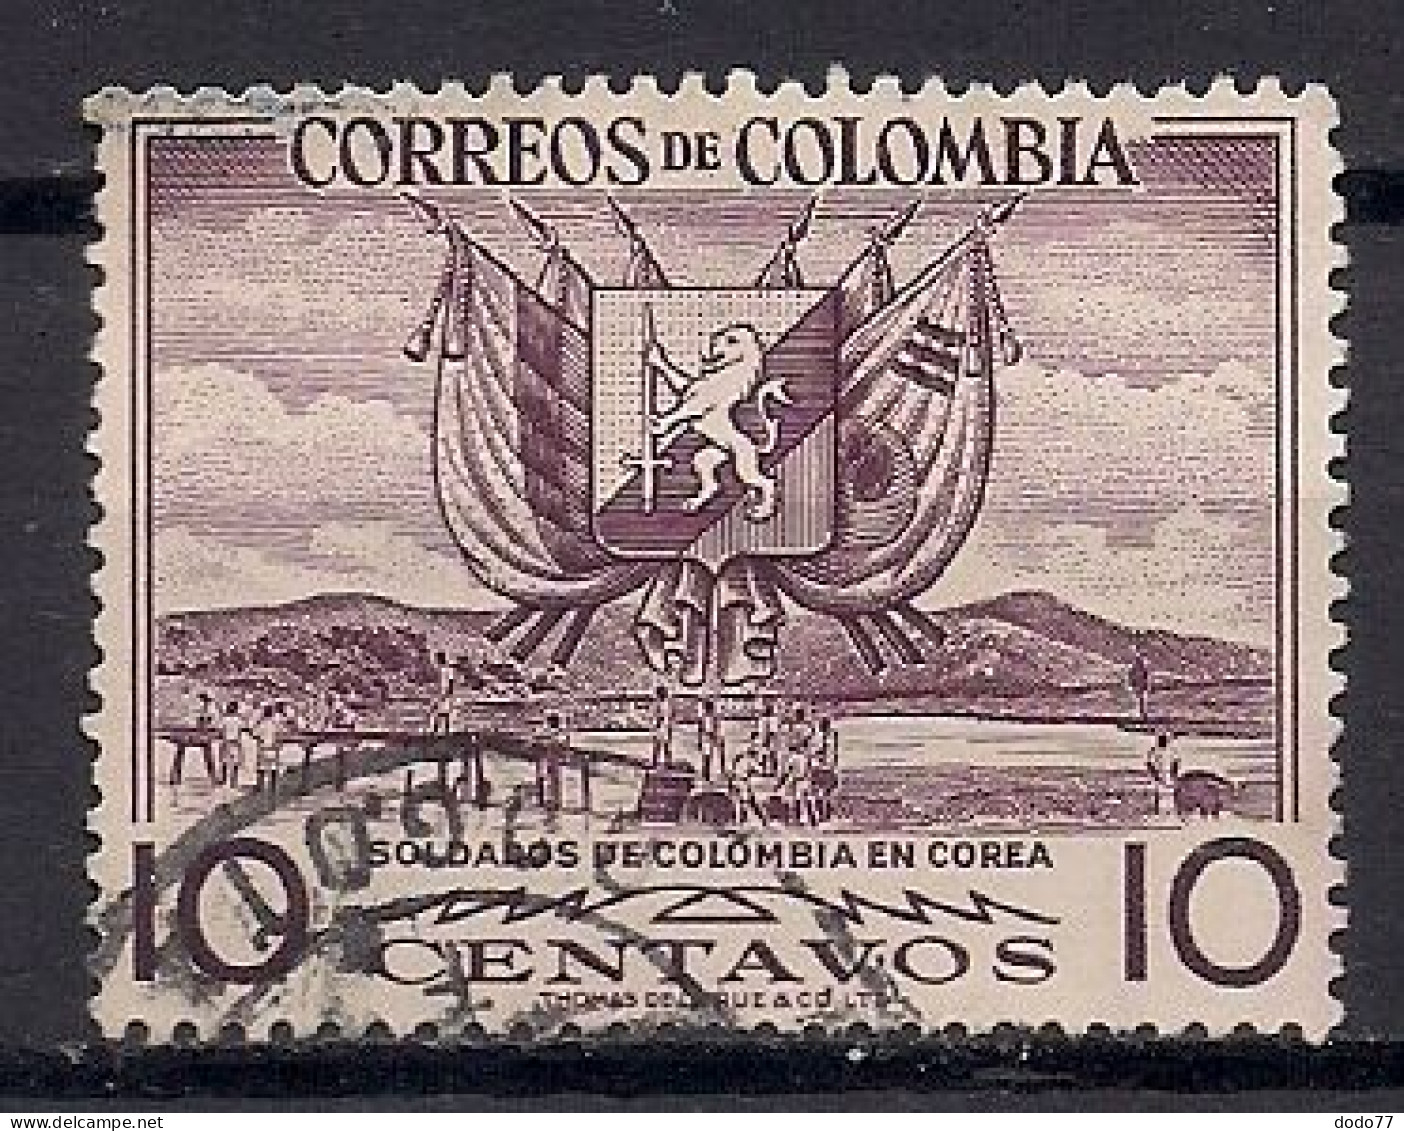 COLOMBIE      OBLITERE - Colombia